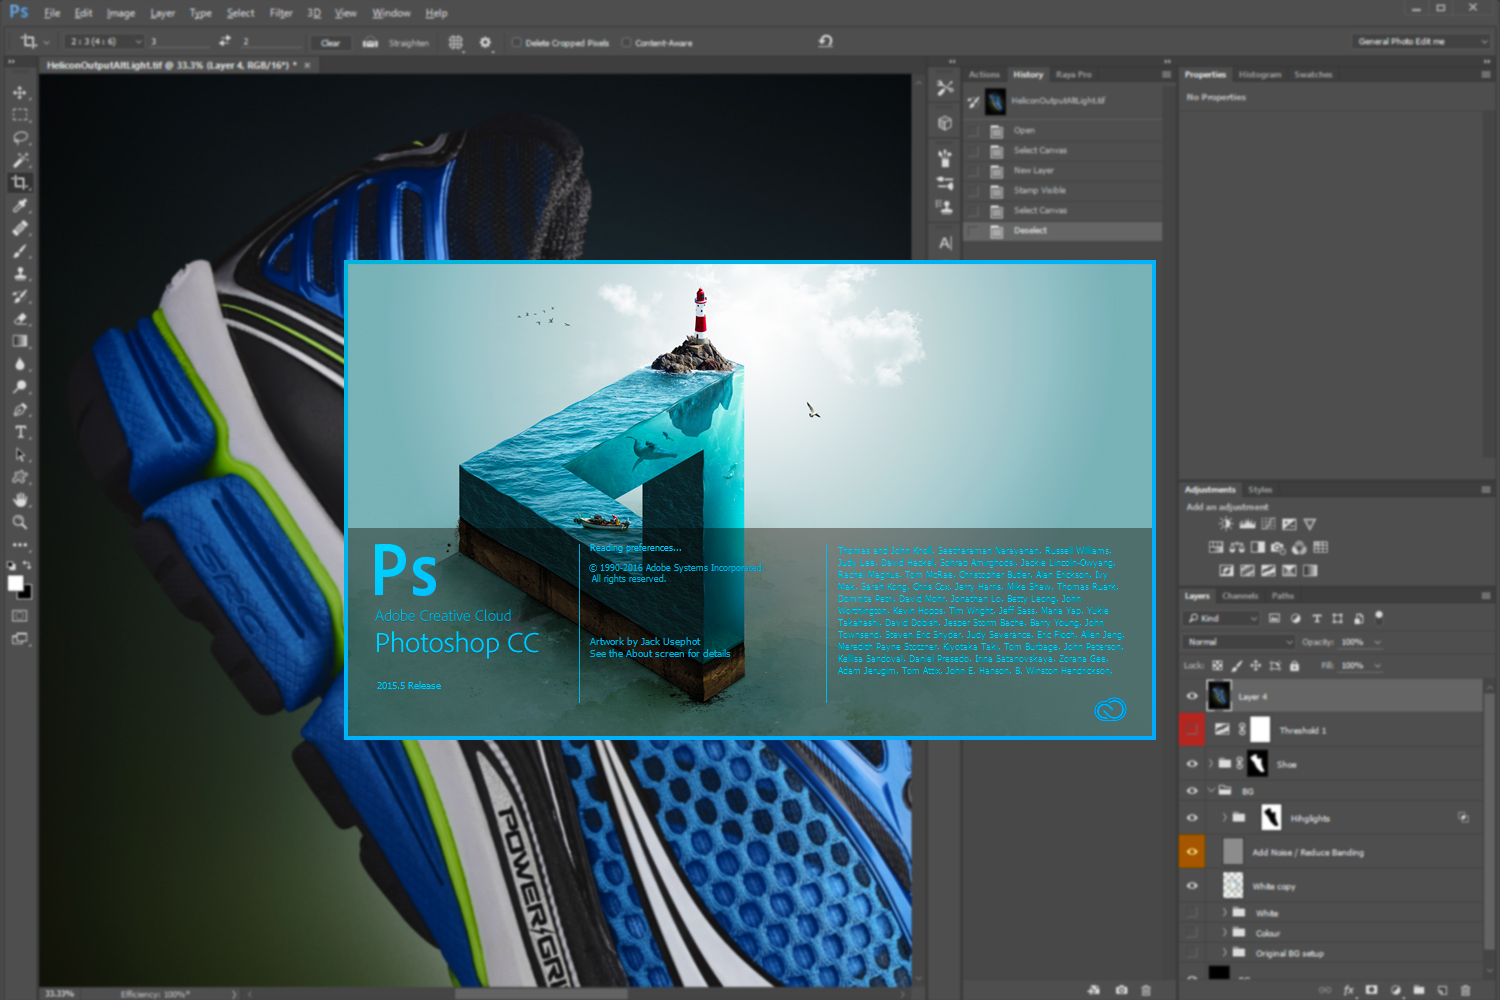 3 Photoshop Tips To Stop You Ruining Your Photos. Do You Commit These Editing Sins?